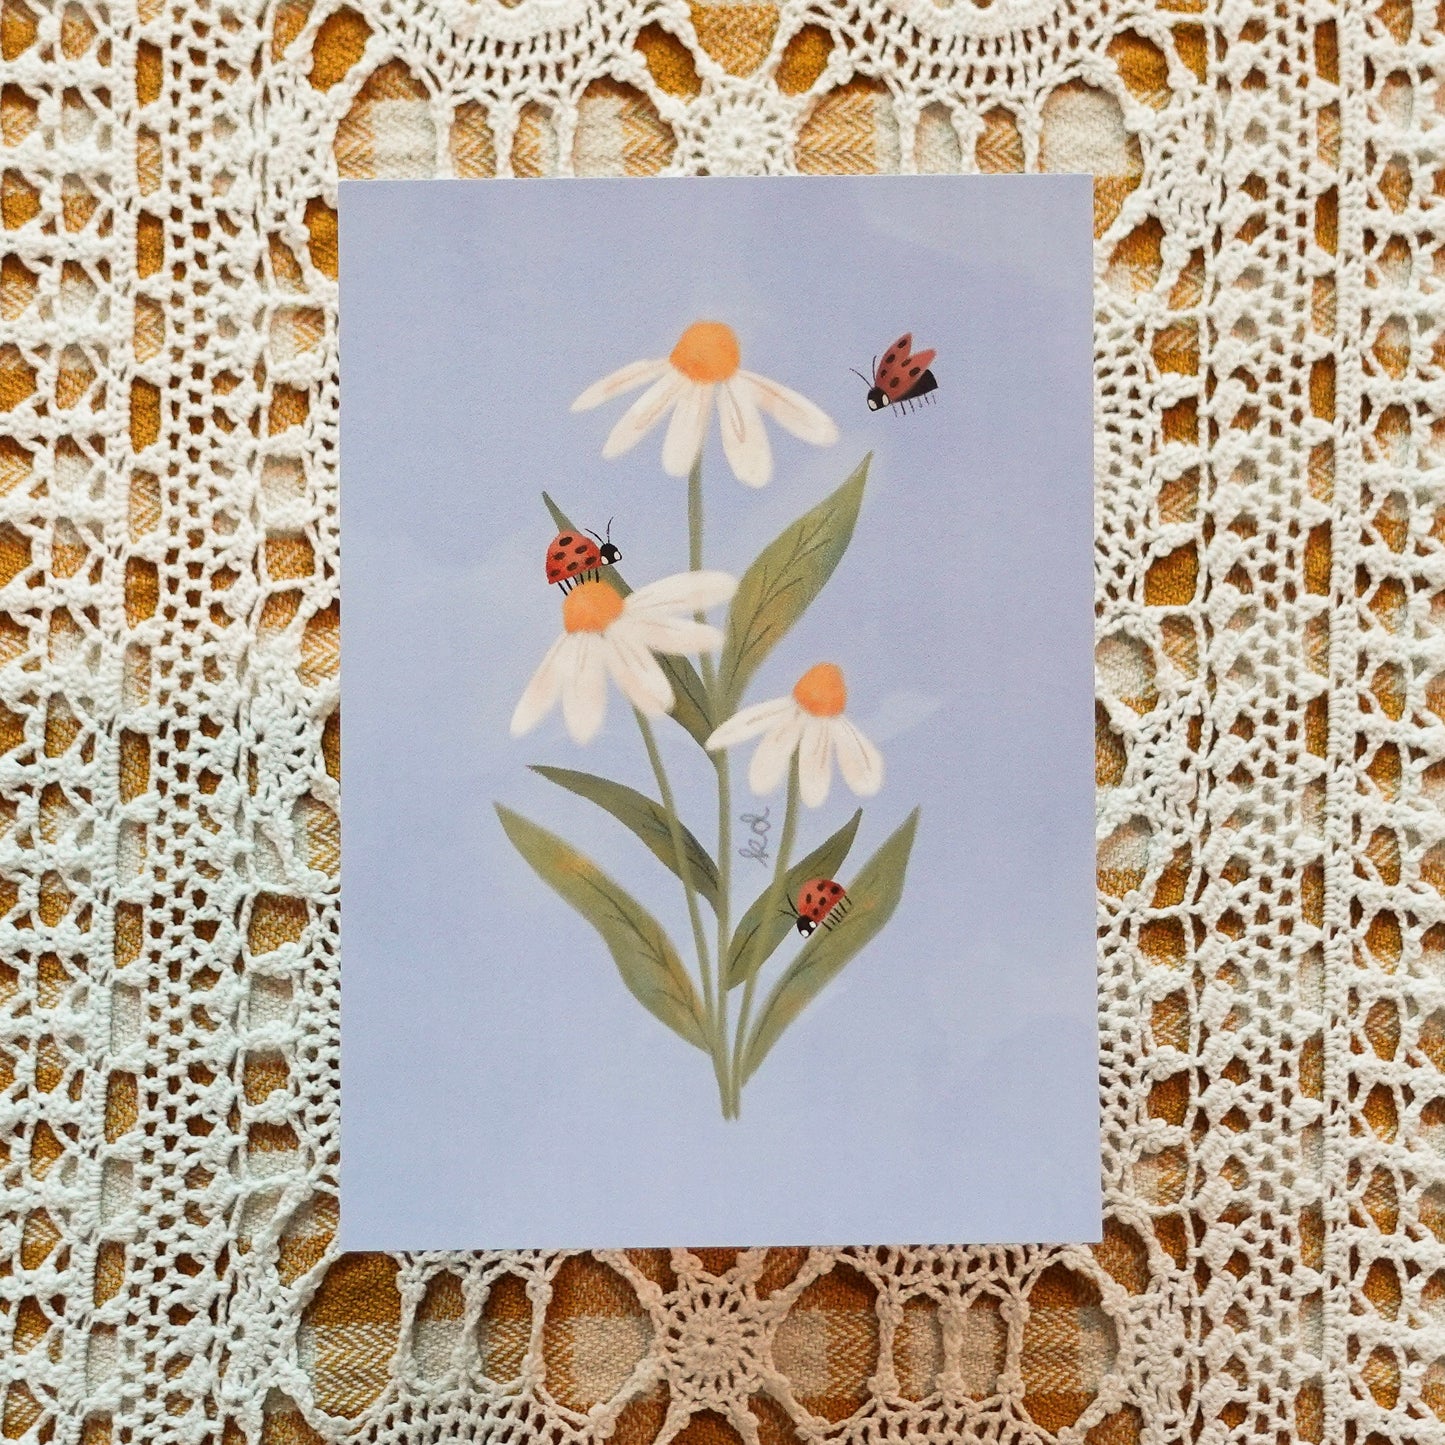 Daisies & Ladybugs Card - Thank you / Generic / General Greeting card